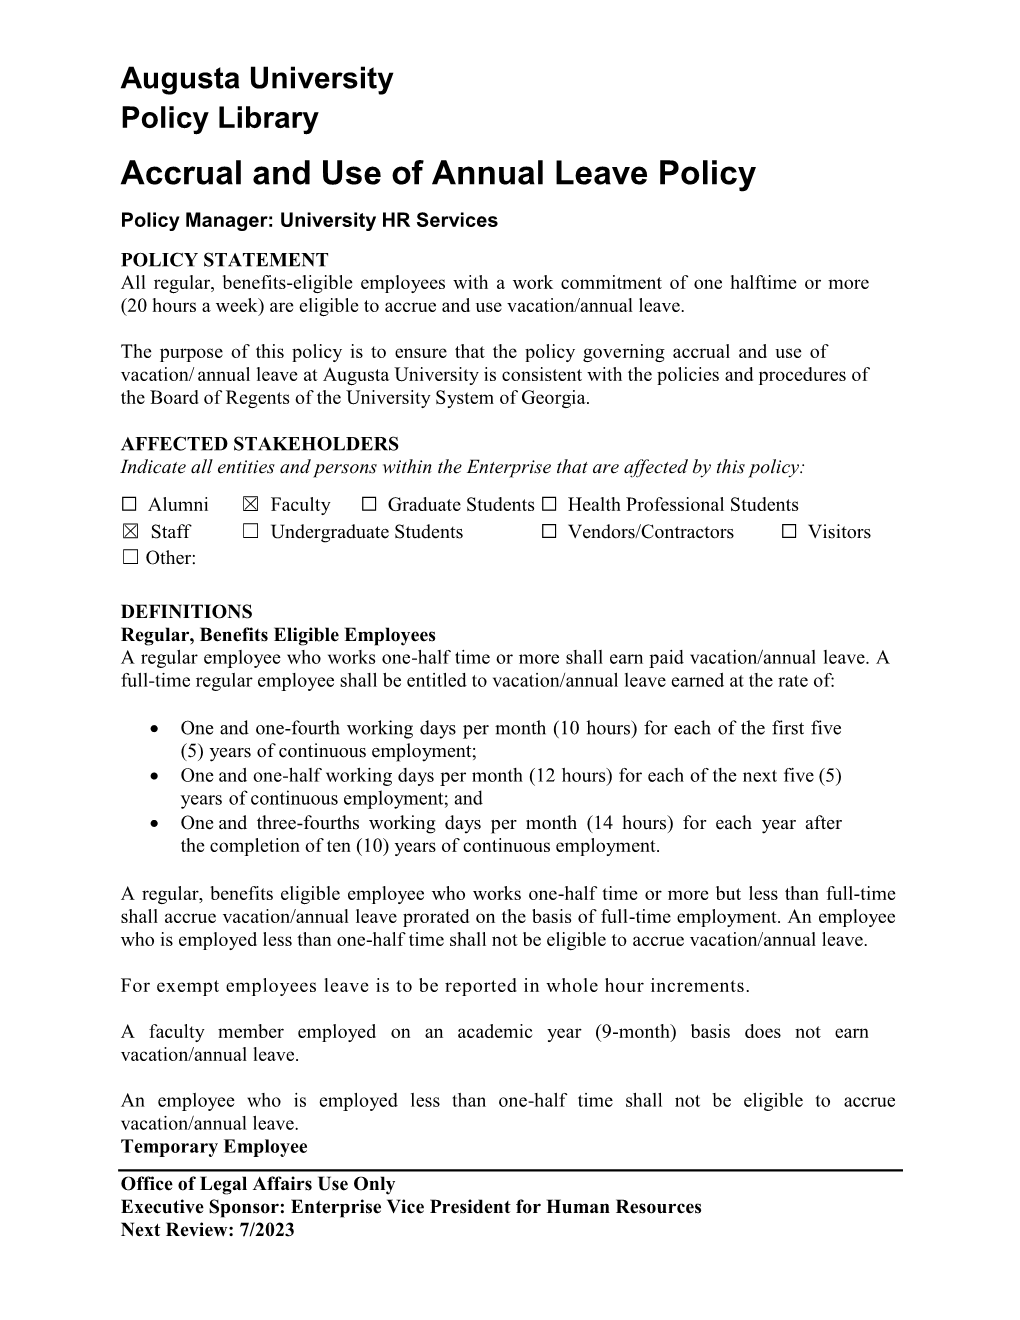 Accrual and Use of Annual Leave Policy